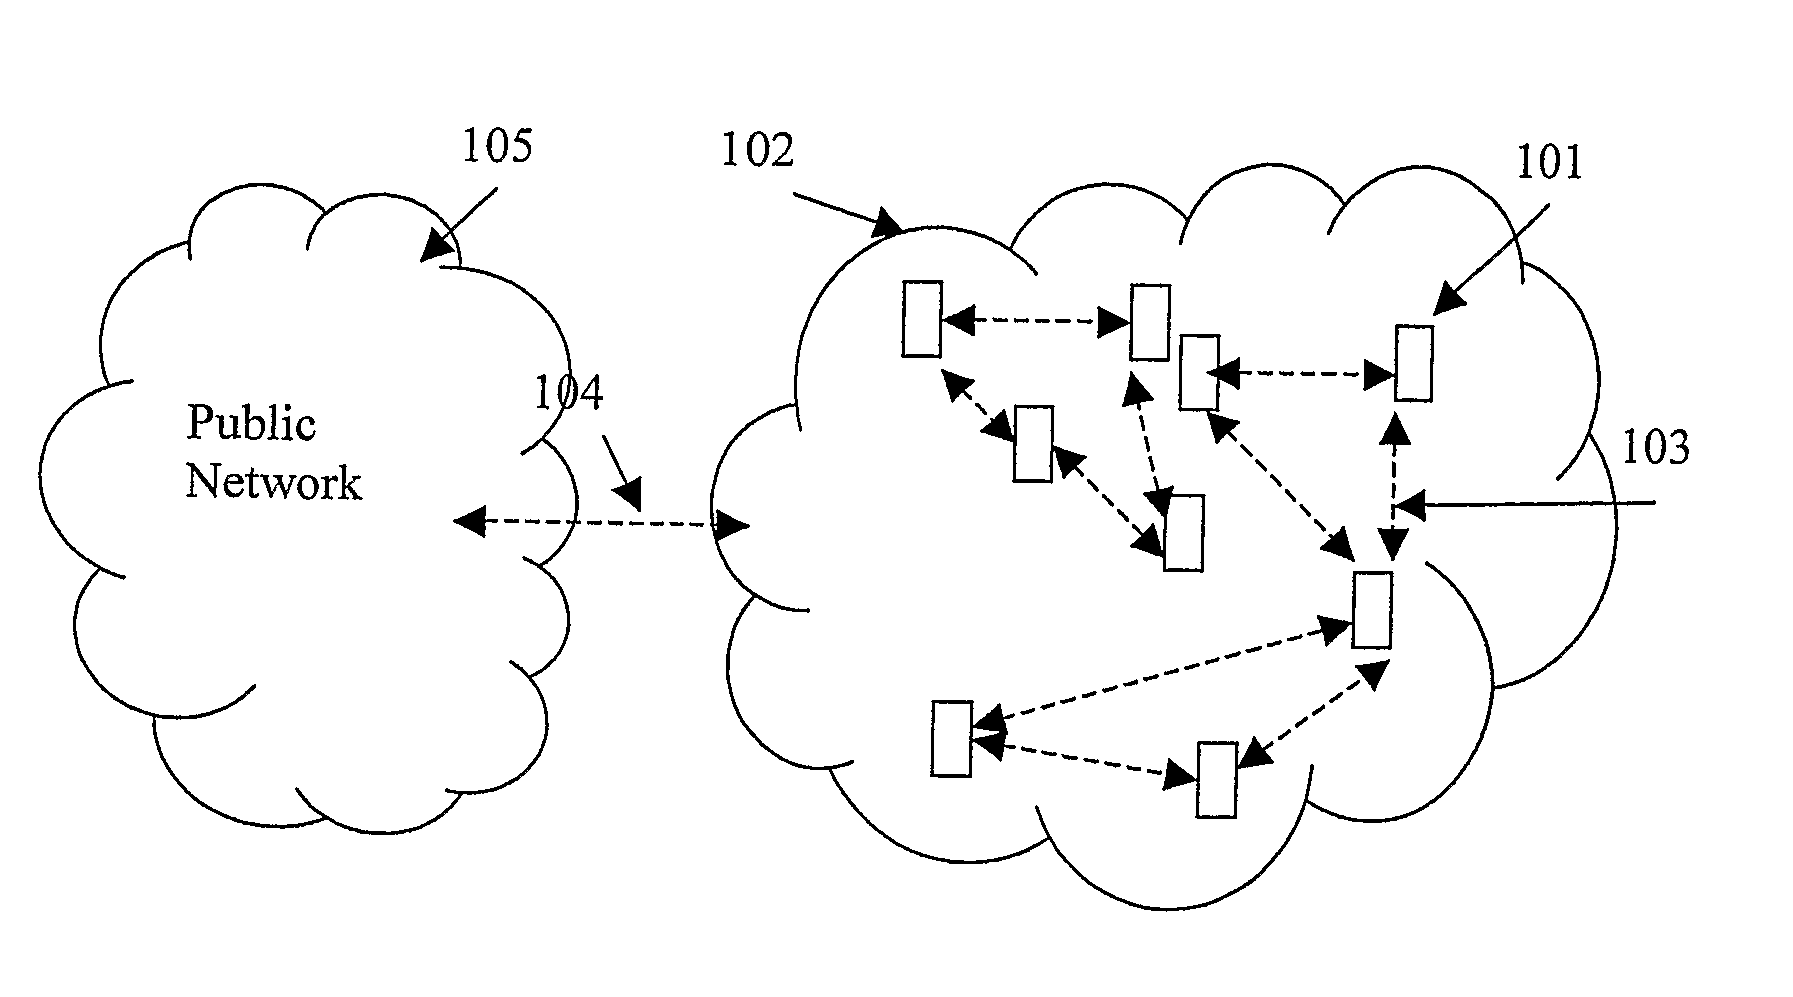 Method for building spontaneous virtual communities based on common interests using wireless equipment